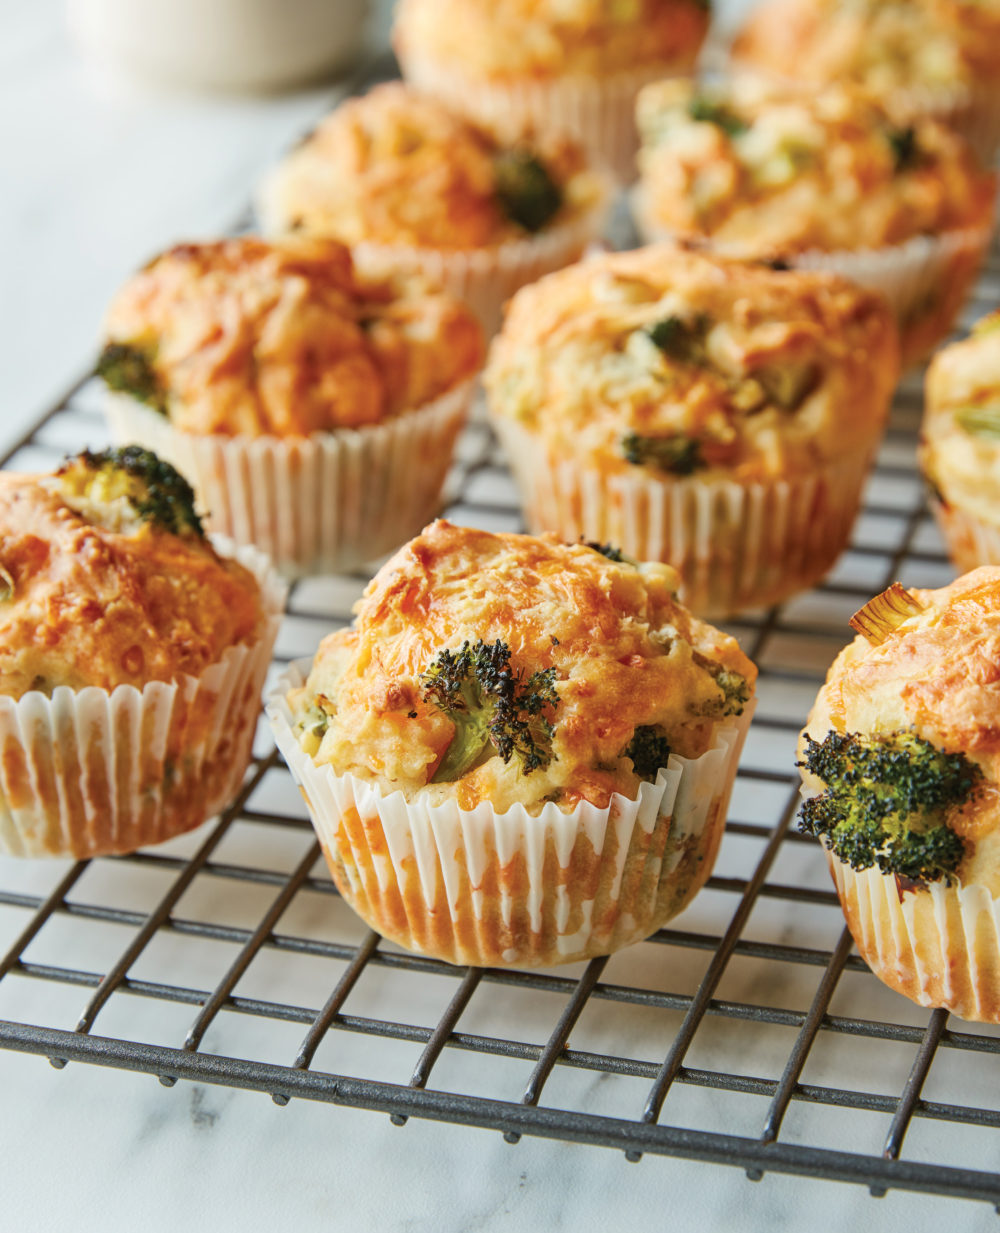 Broccoli Cheddar Muffins are shown on a wire rack.